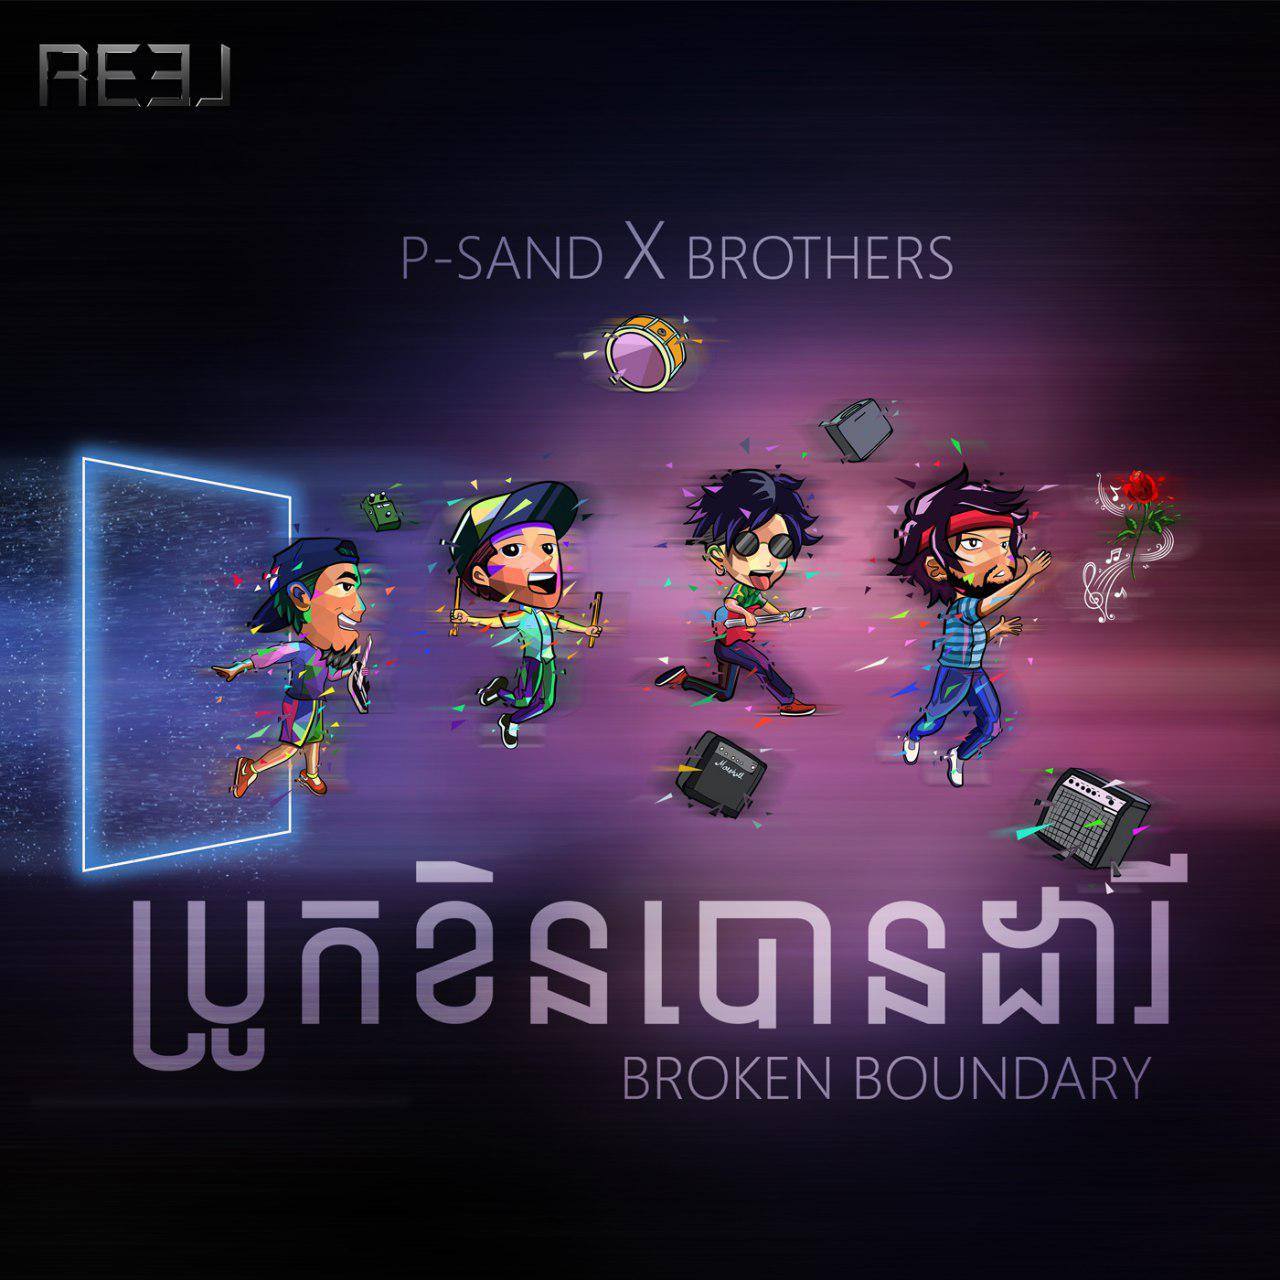 P-Sand X Brothers